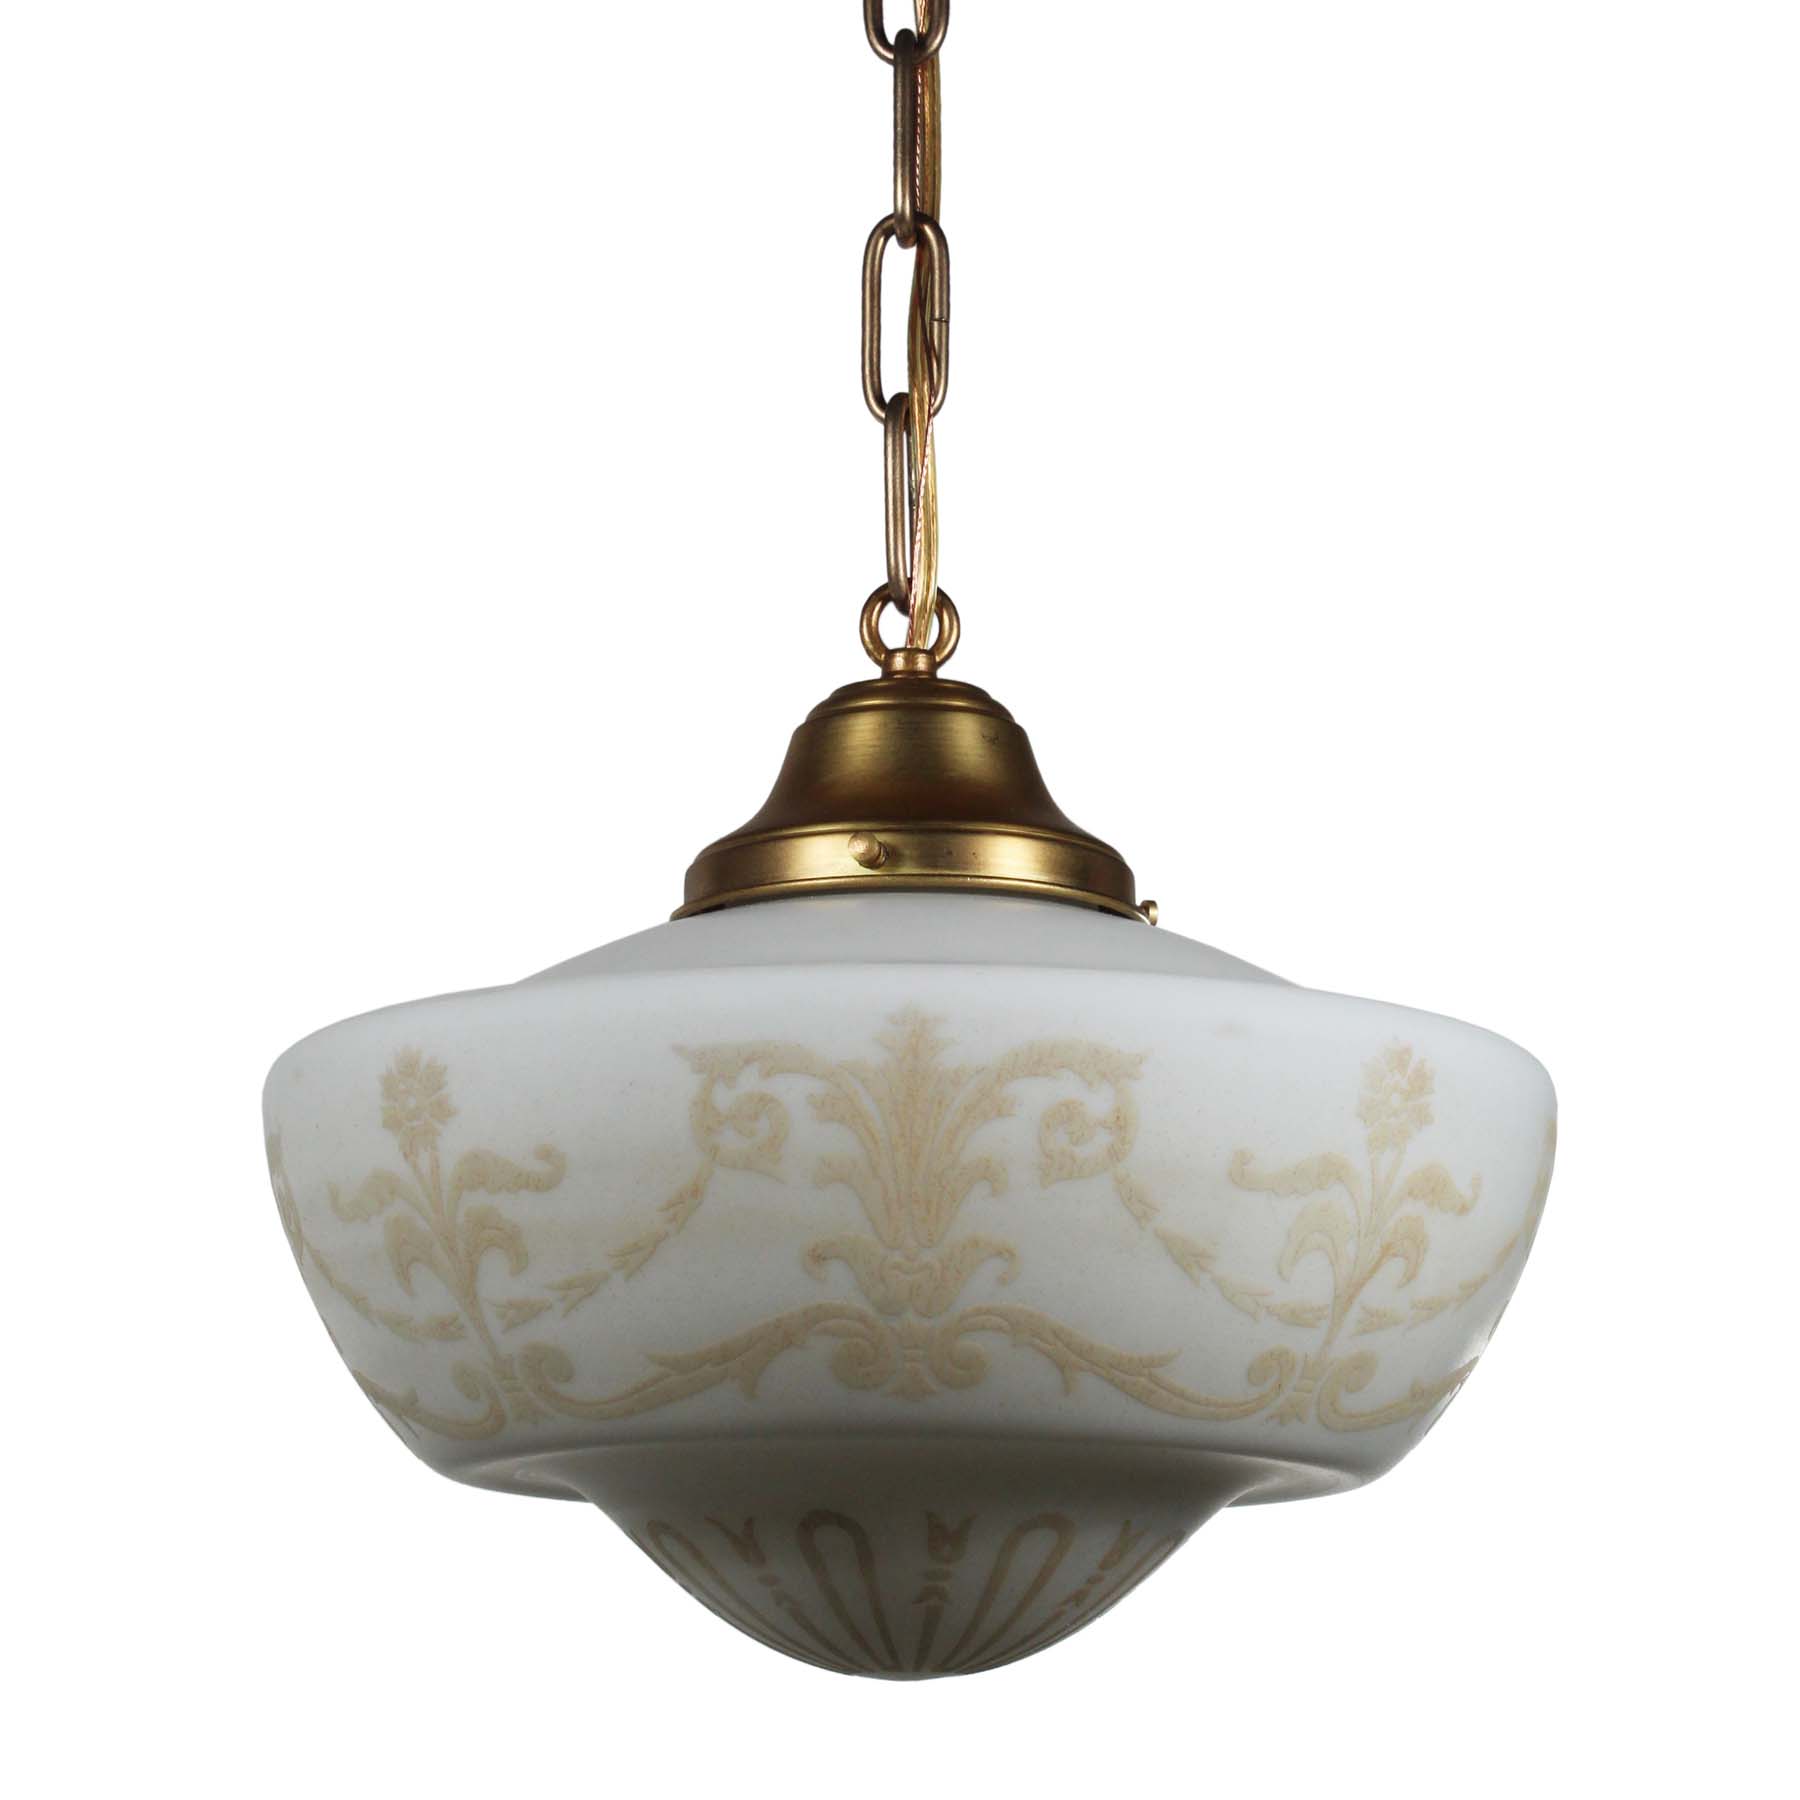 SOLD Neoclassical Pendant Lights with Acid Cut-Back Shades, Antique Lighting-71251